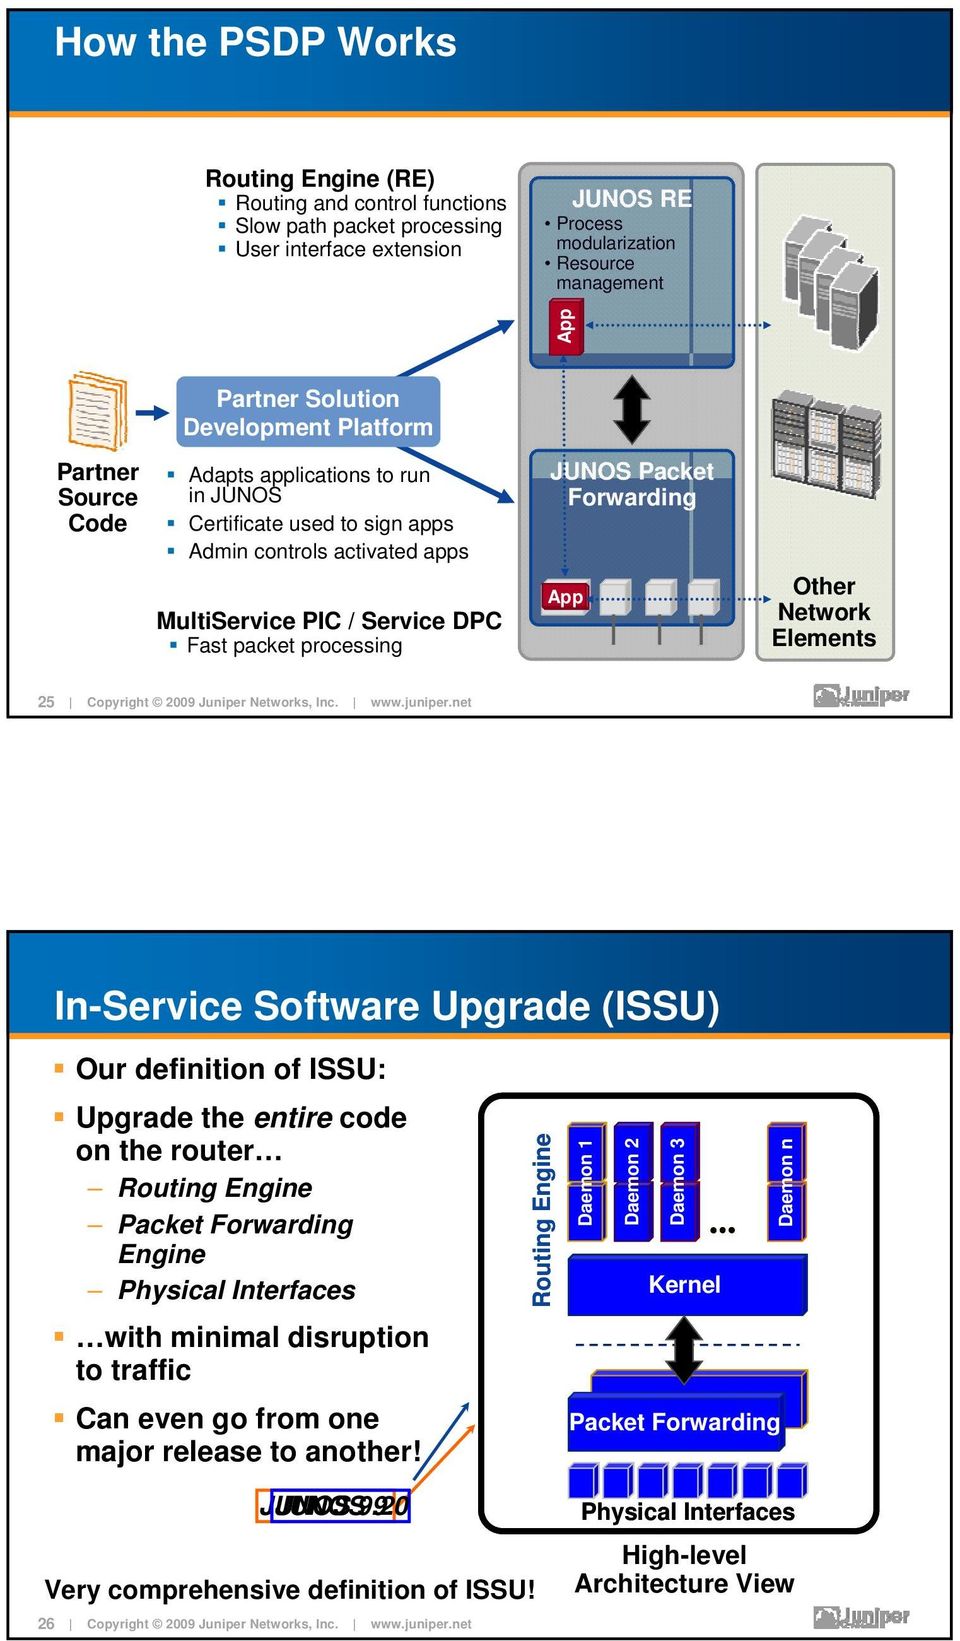 Packet Forwarding App Other Network Elements 25 In-Service Software Upgrade (ISSU) Our definition of ISSU: Upgrade the entire code on the router Routing Engine Packet Forwarding Engine Physical